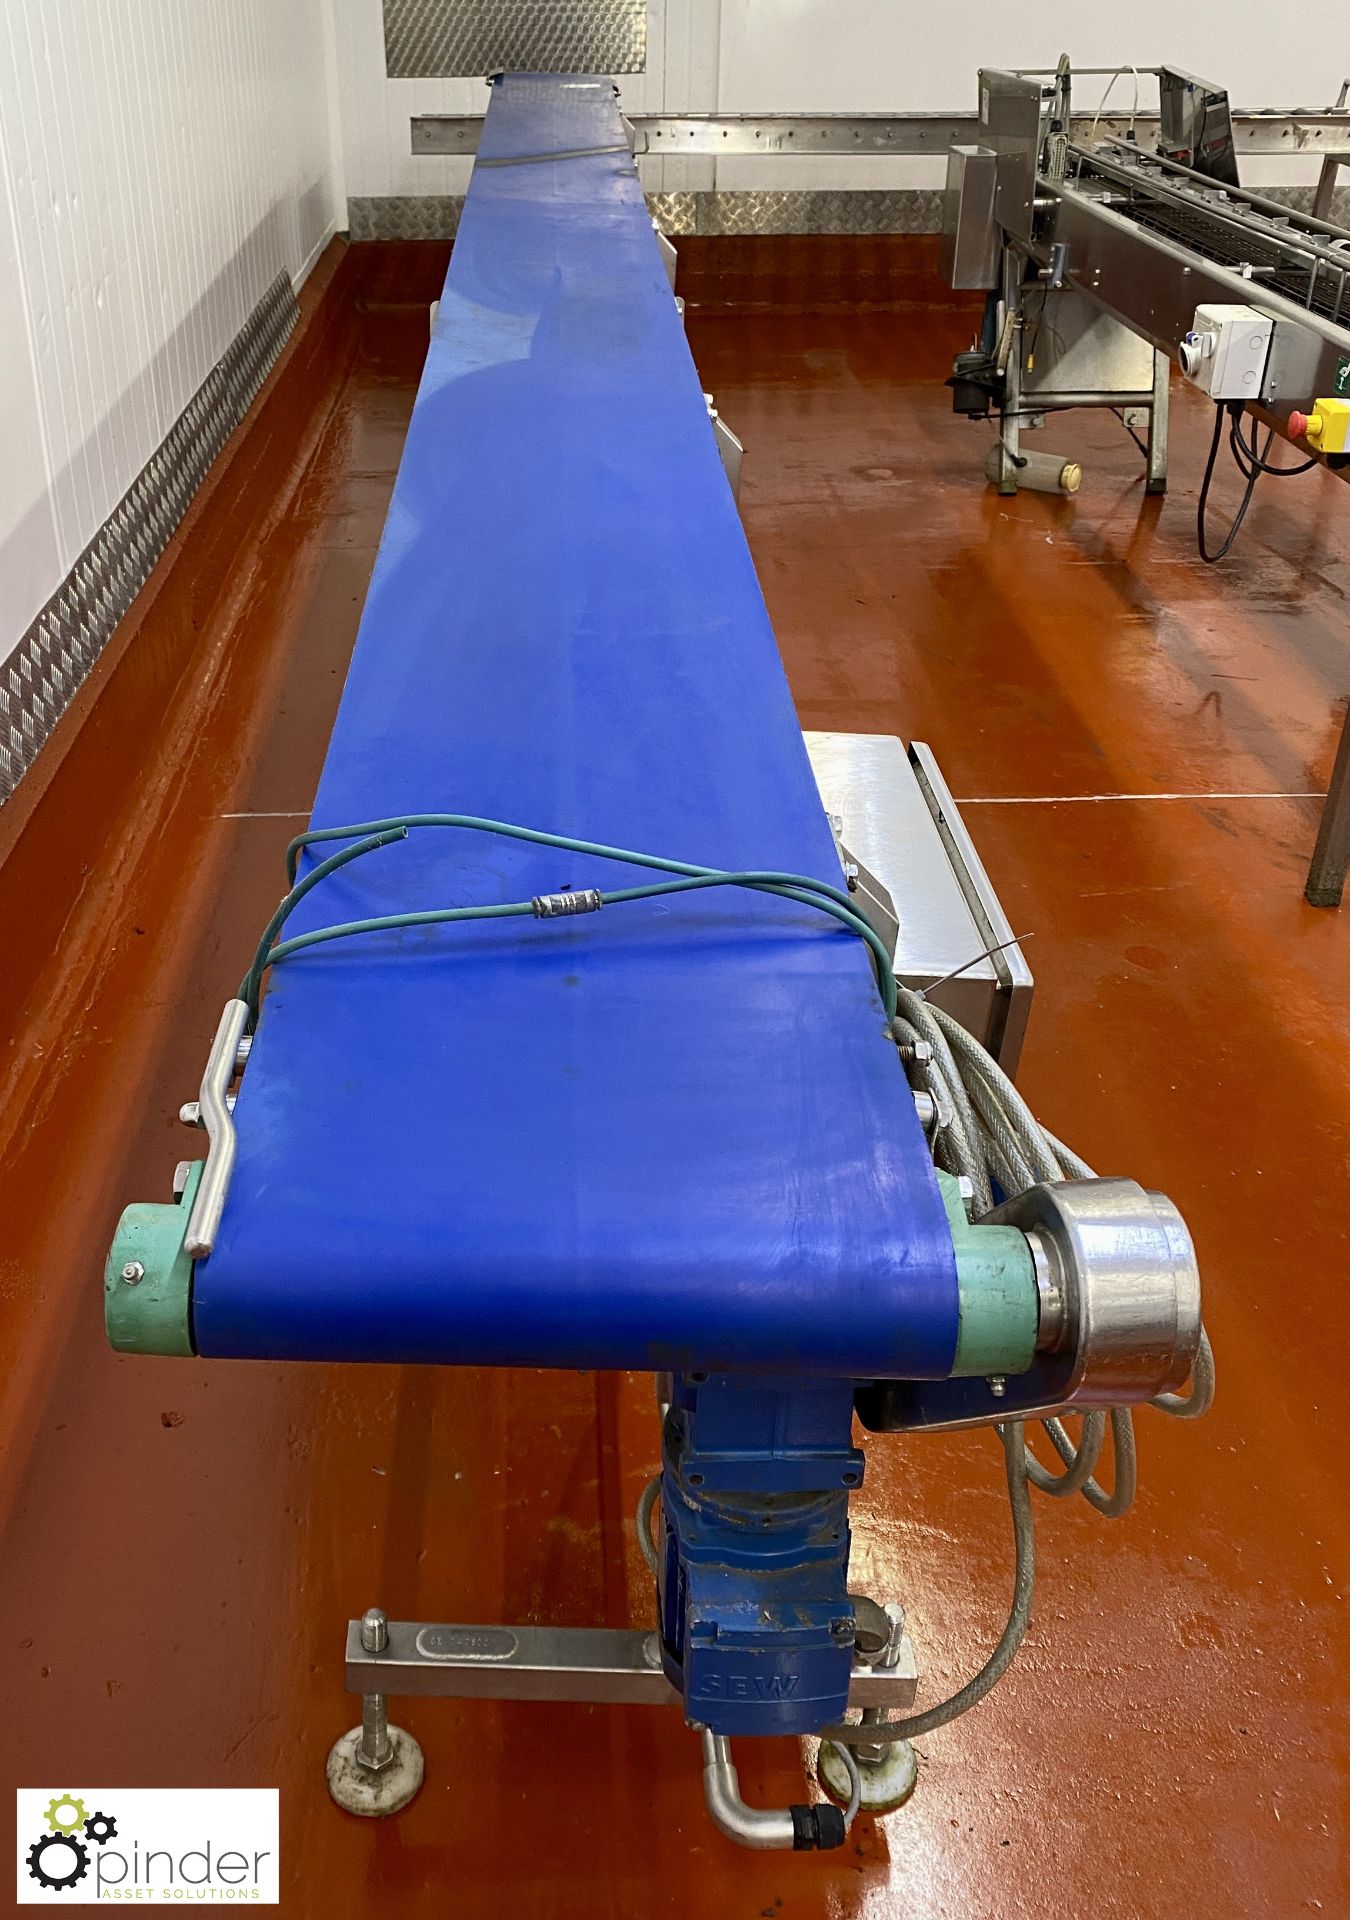 Stainless steel Belt Conveyor, 4950mm x 310mm, 240volts (Lift Out Fee: £30 plus VAT) - Image 3 of 6